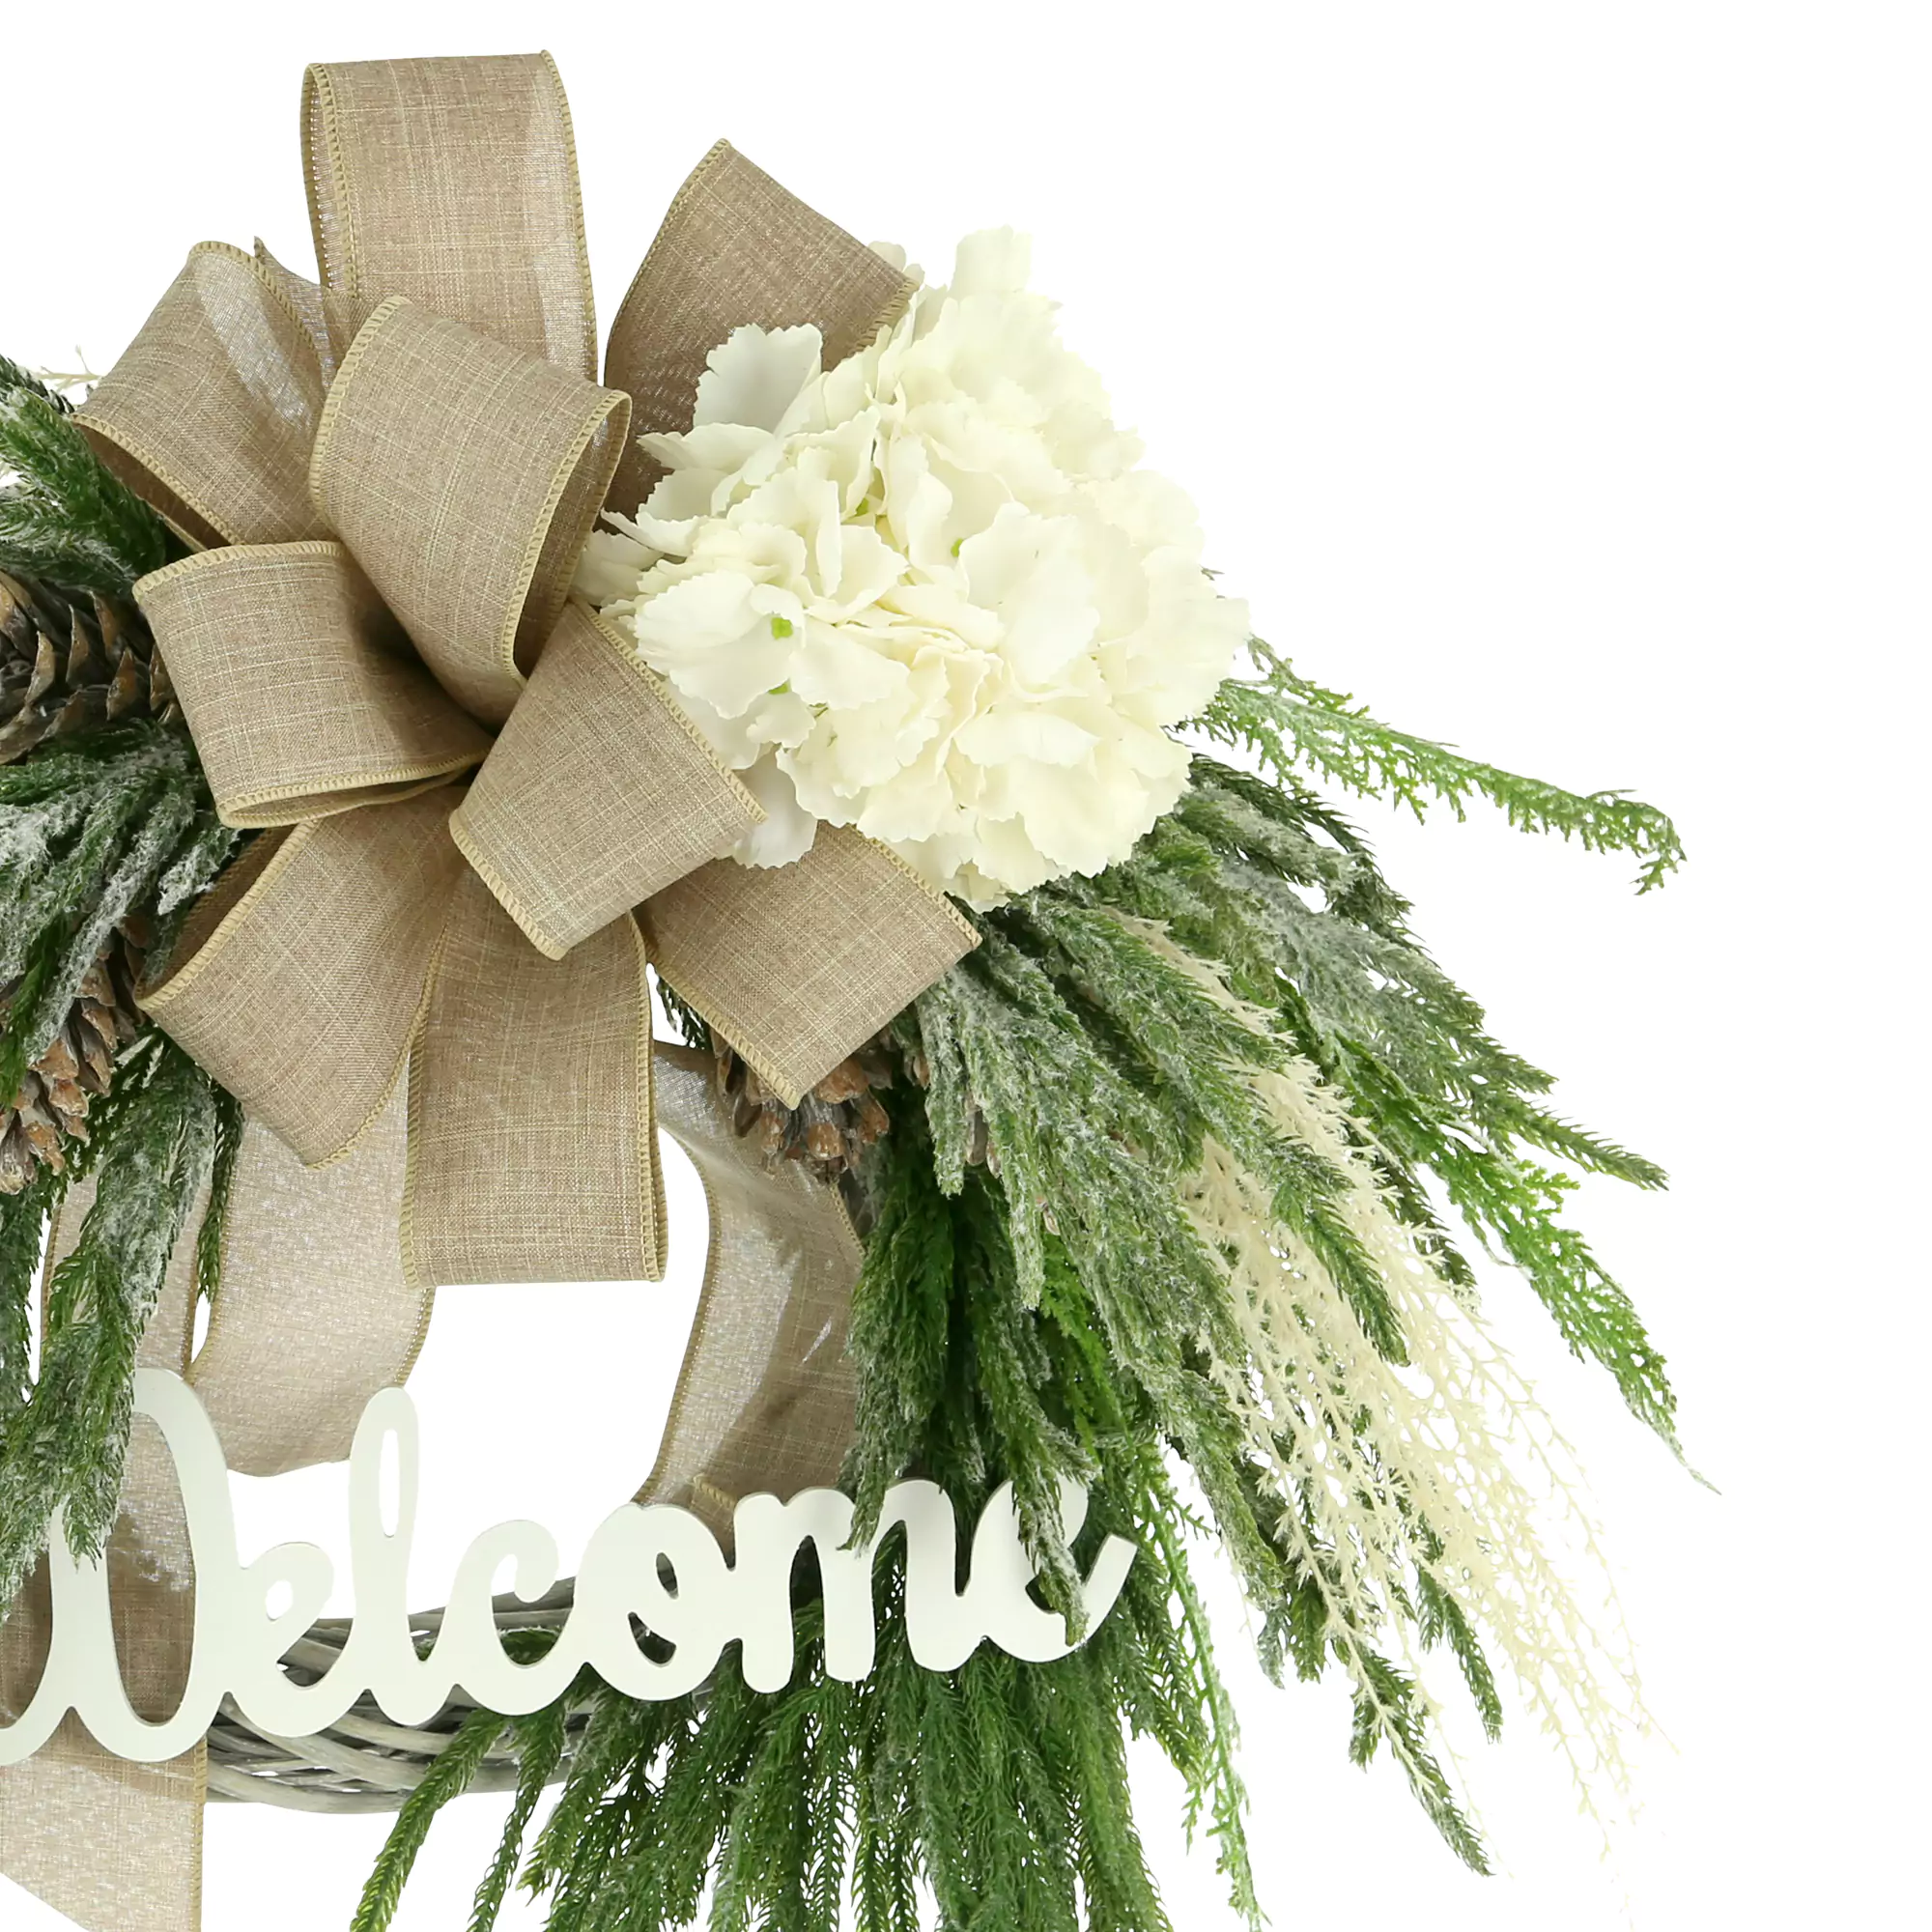 30" Holiday Willow Wreath with Hydrangeas, Bows and "Welcome" Sign